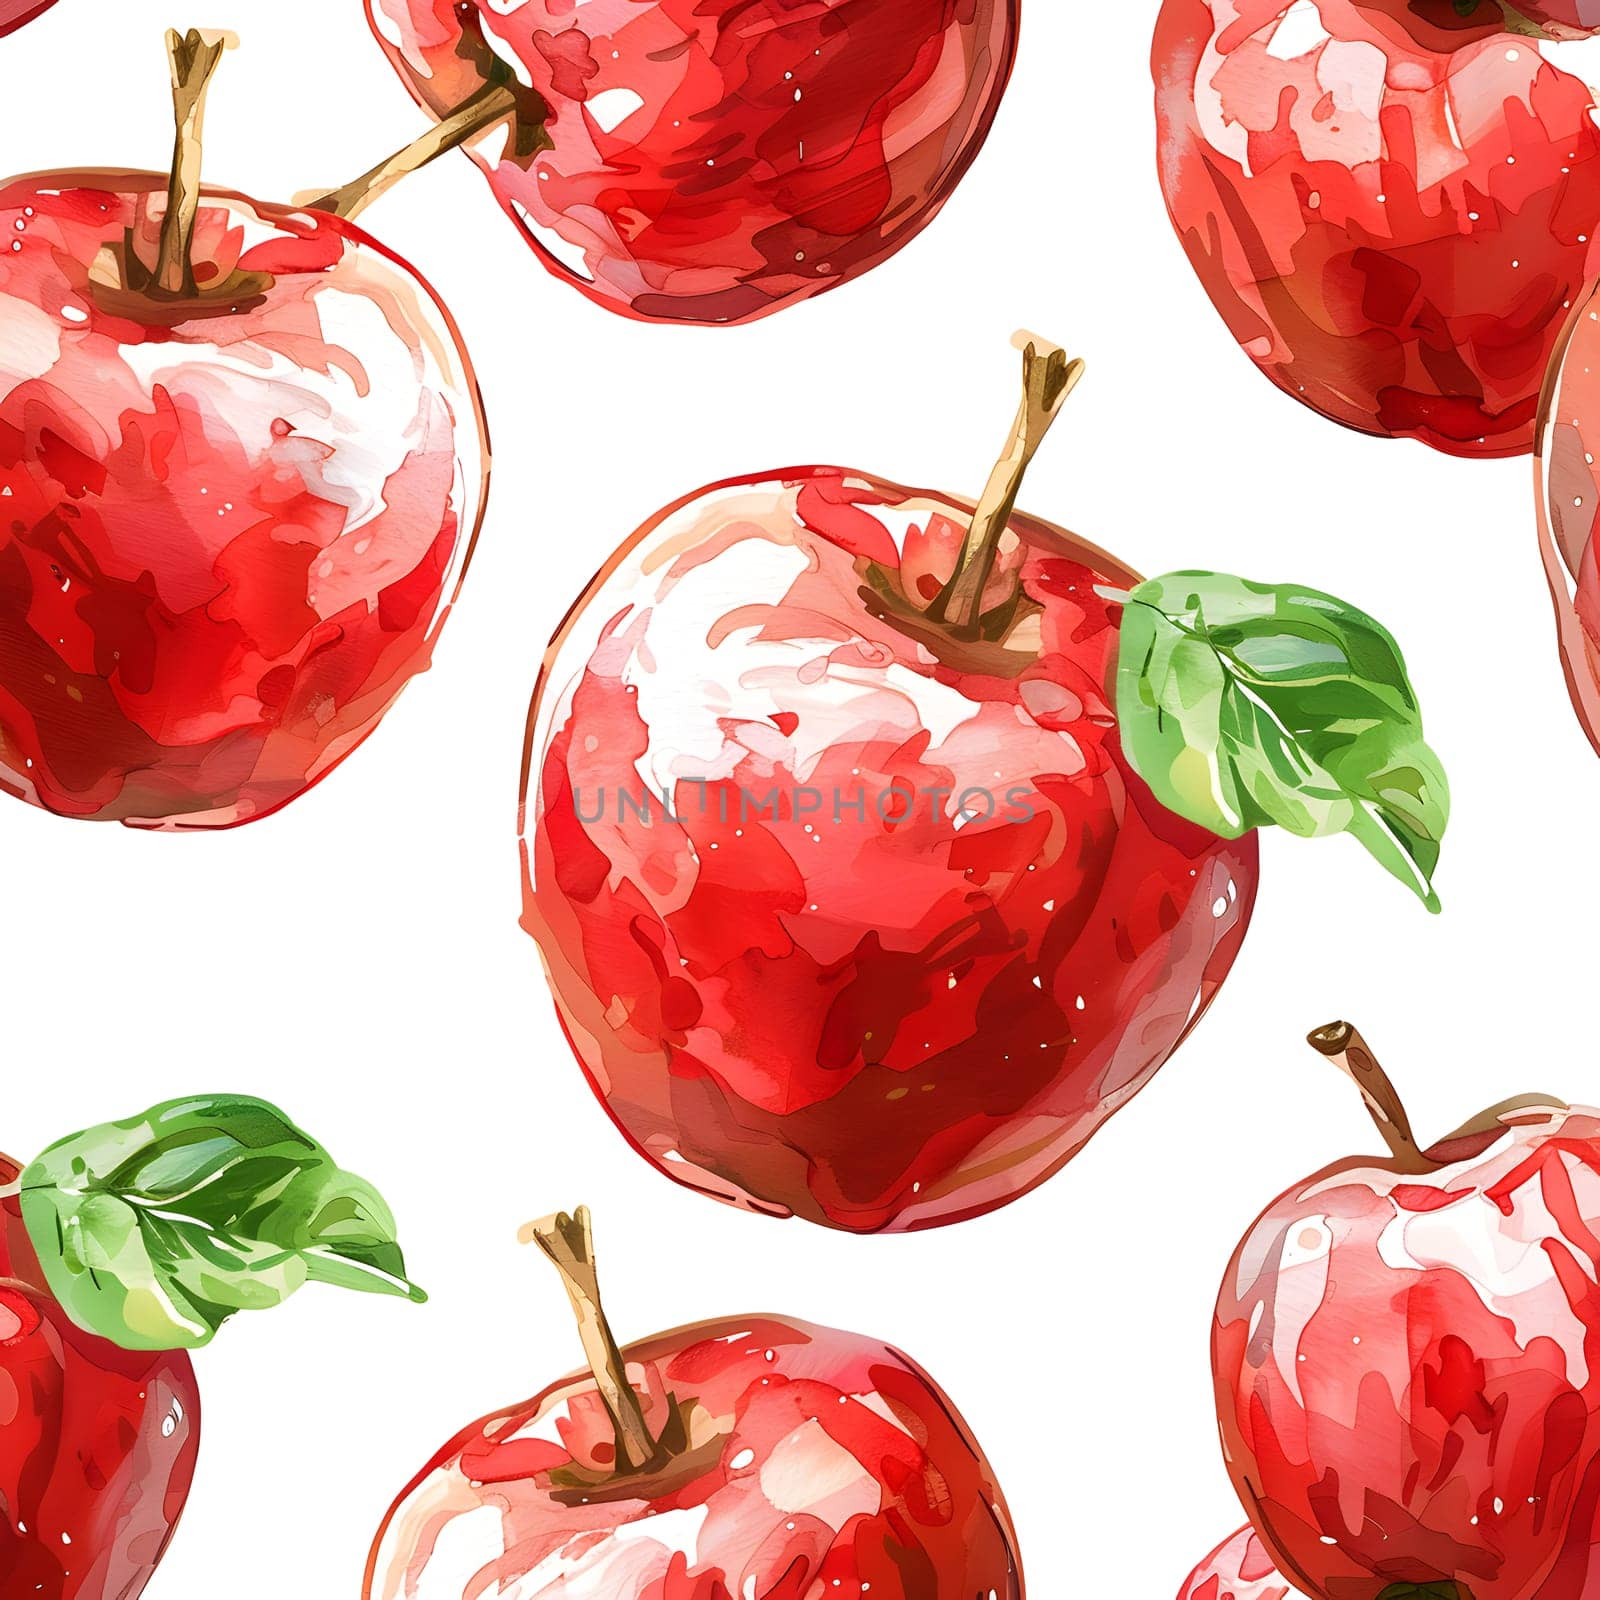 a seamless pattern of red apples with green leaves on a white background High quality